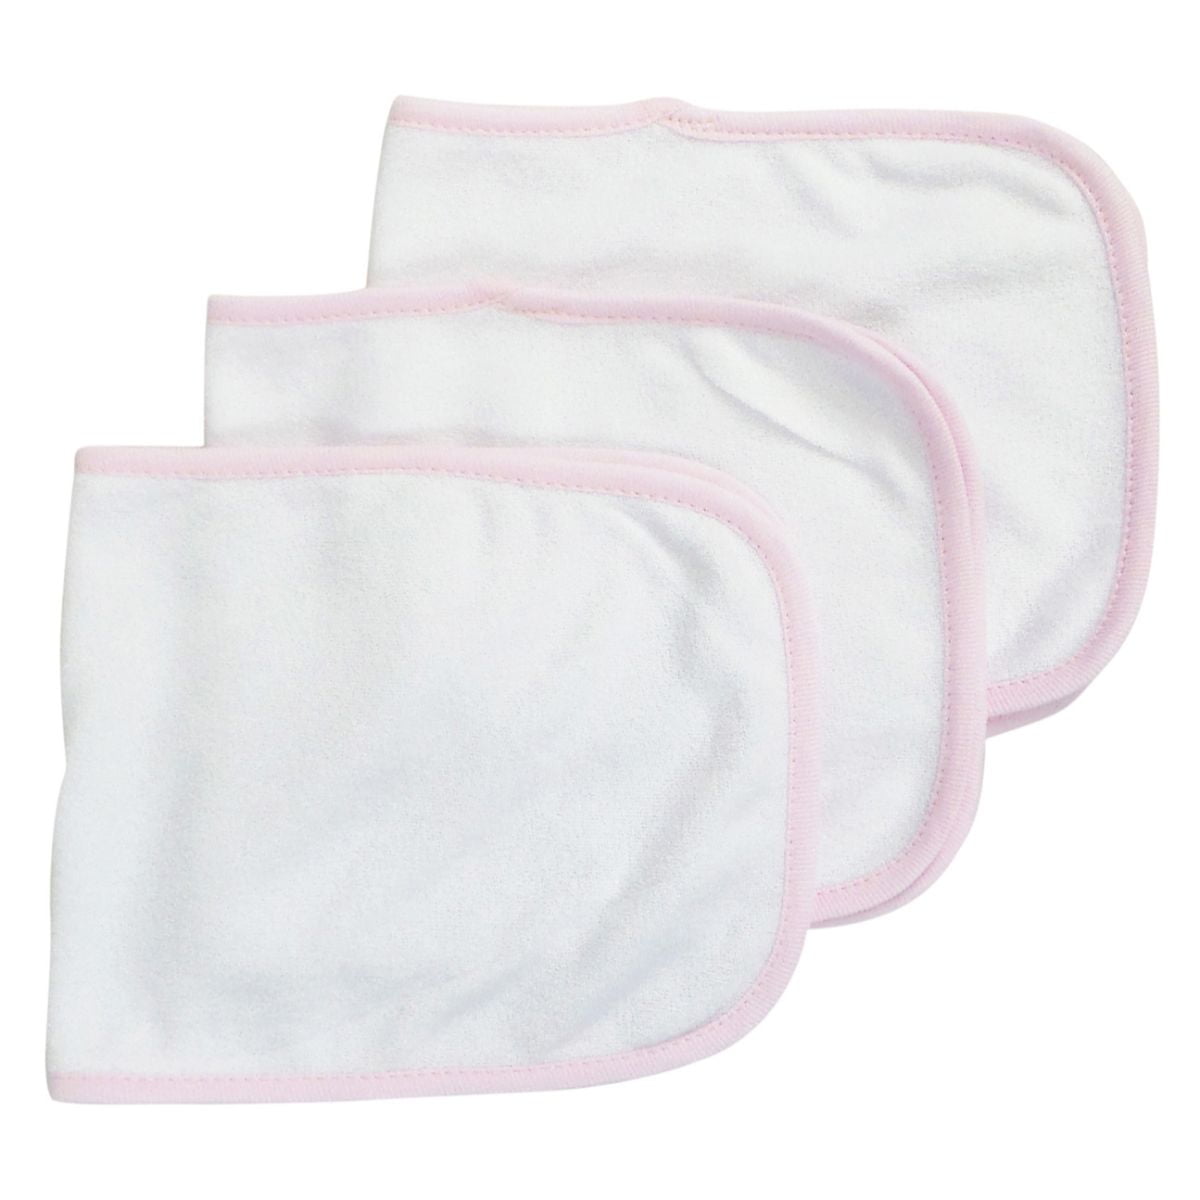 12.25 X 7.5 In. Baby Burpcloth, White With Pink Trim - Pack Of 3